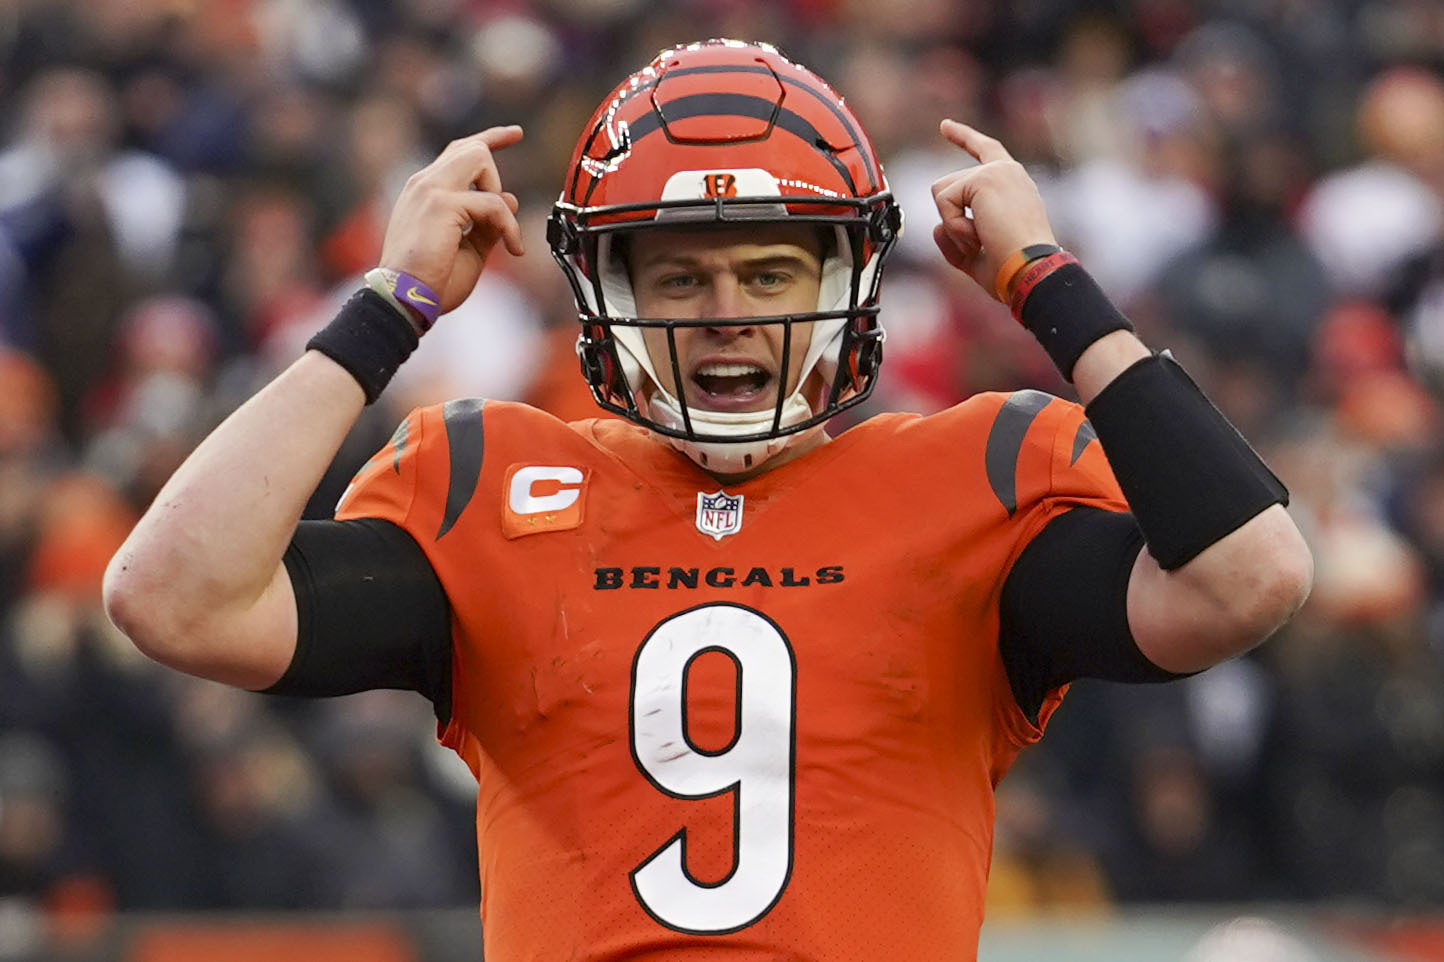 Joe Burrow is giving the Bengals a momentary lifeline to escape